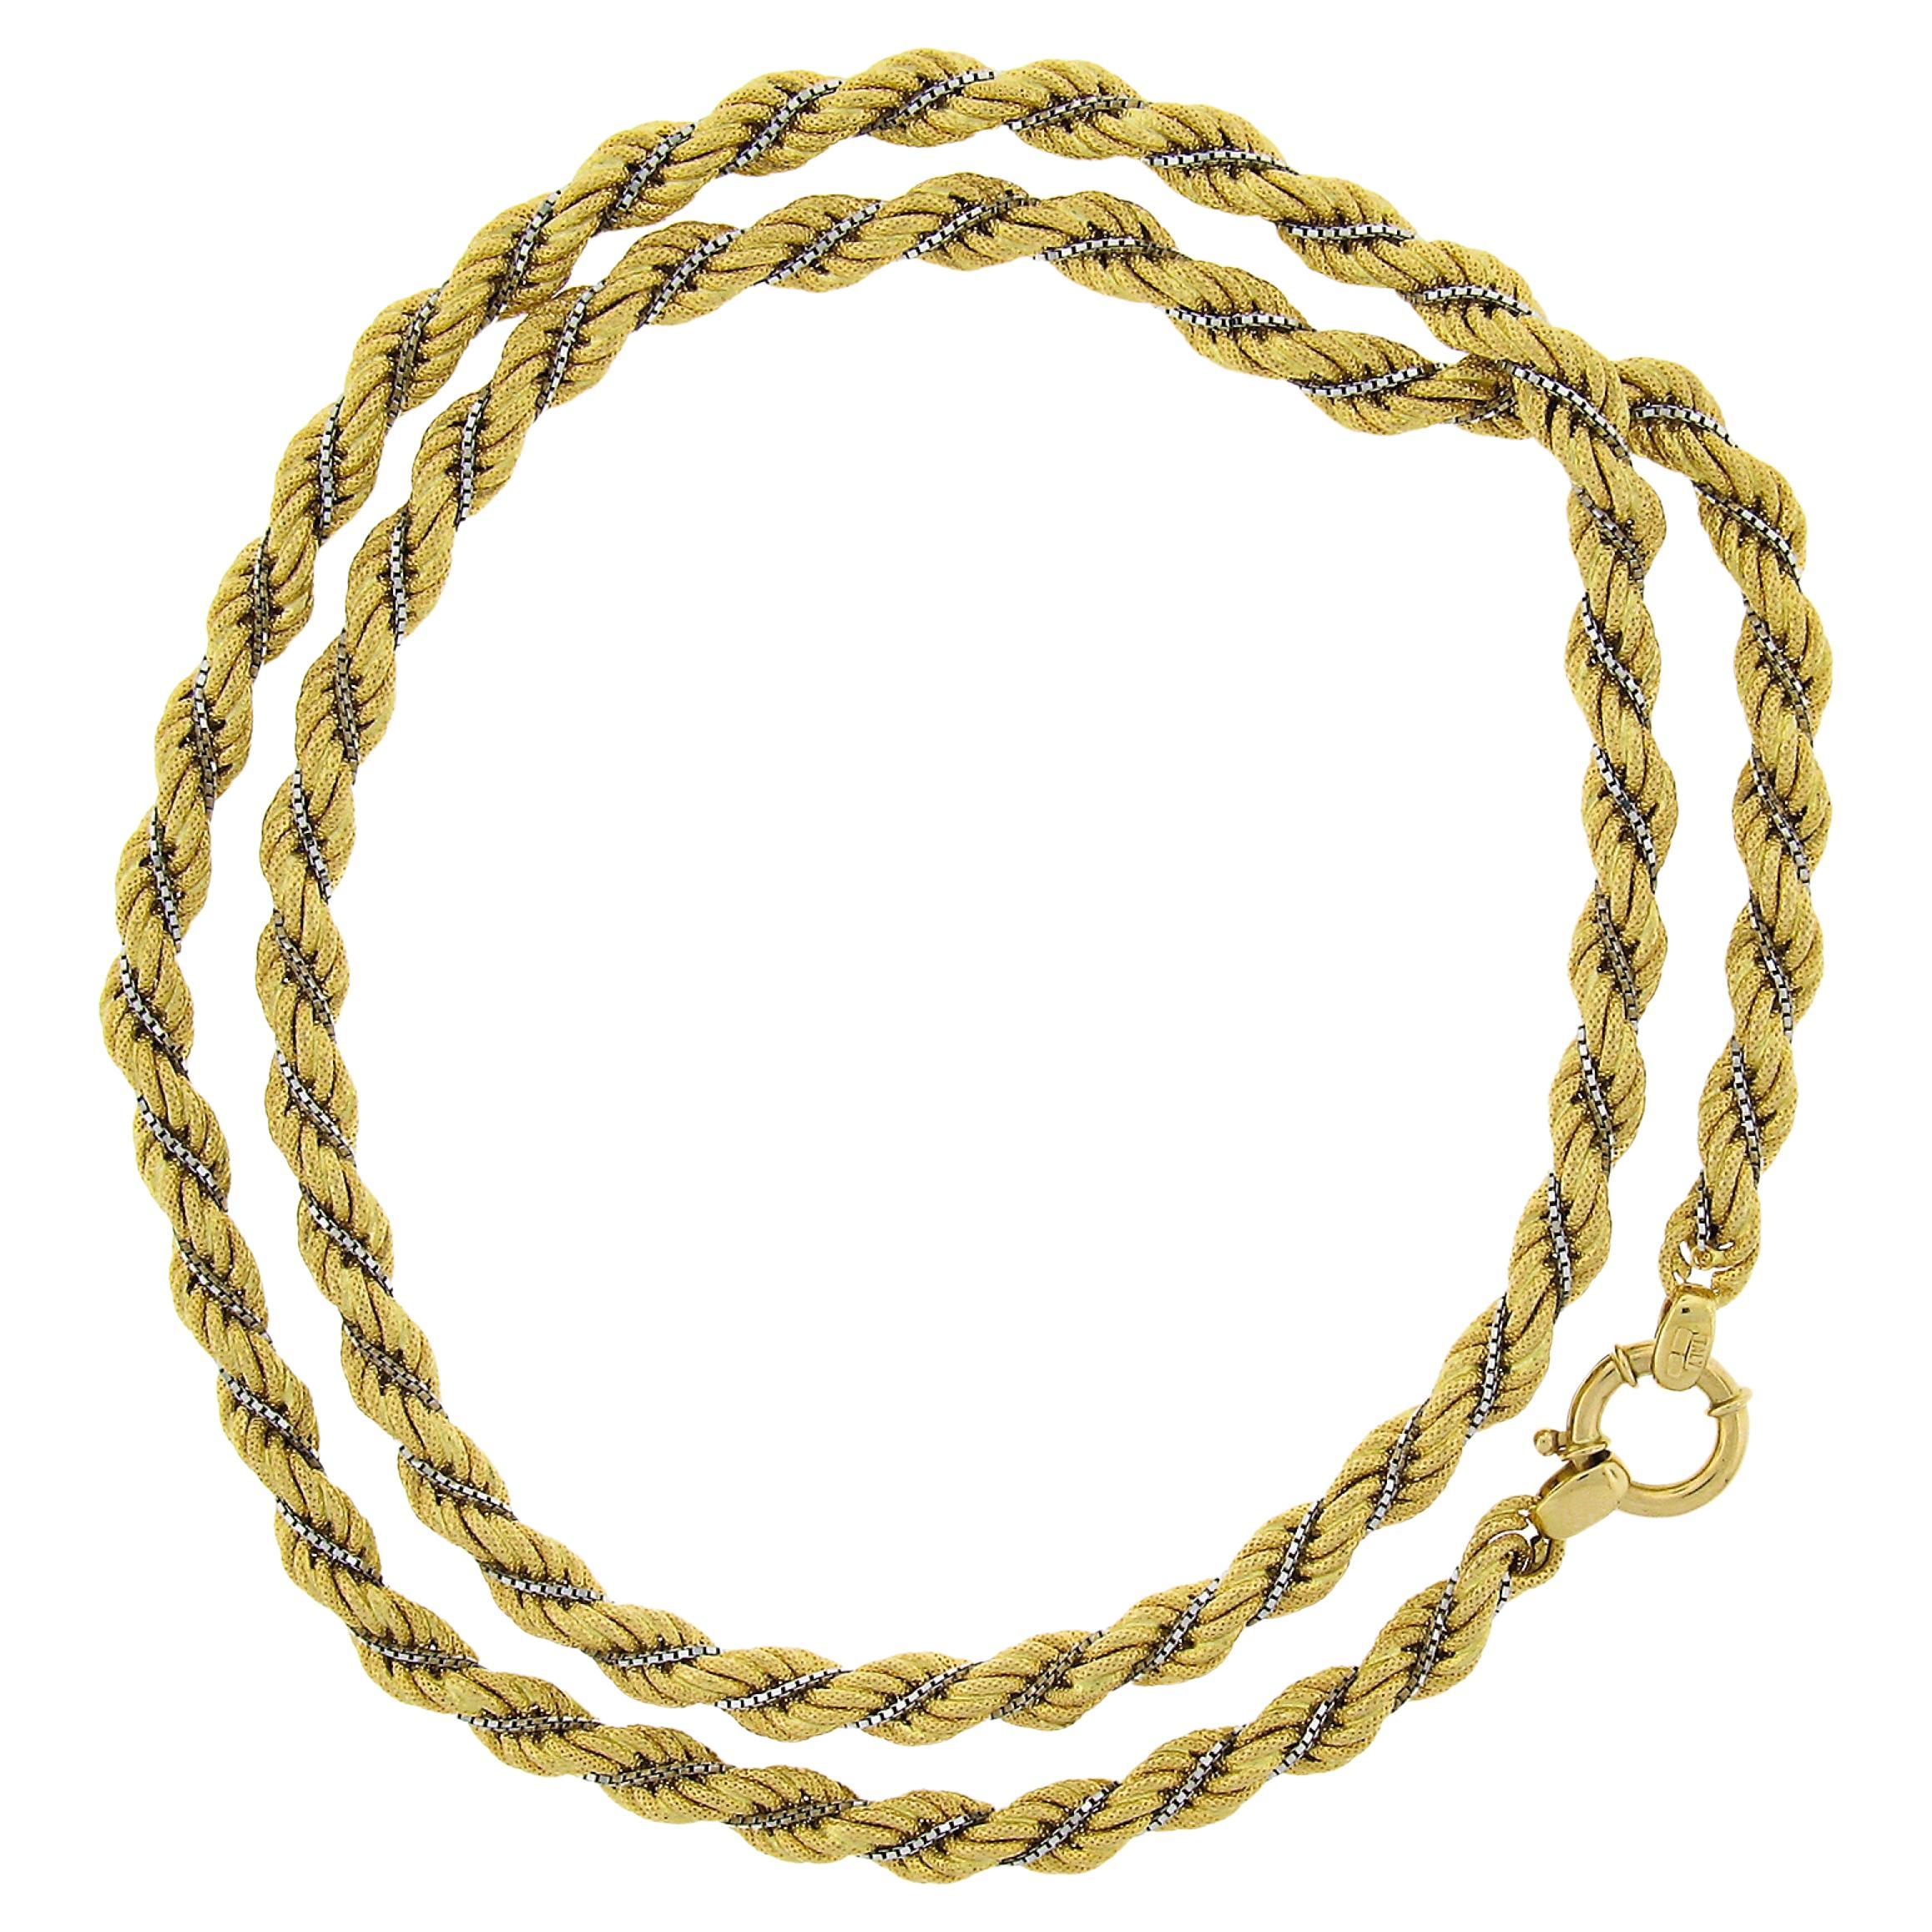 Milor 18K Gold 32" Long 7.8mm Wide Textured Rope Wrapped w/ Box Chain Necklace